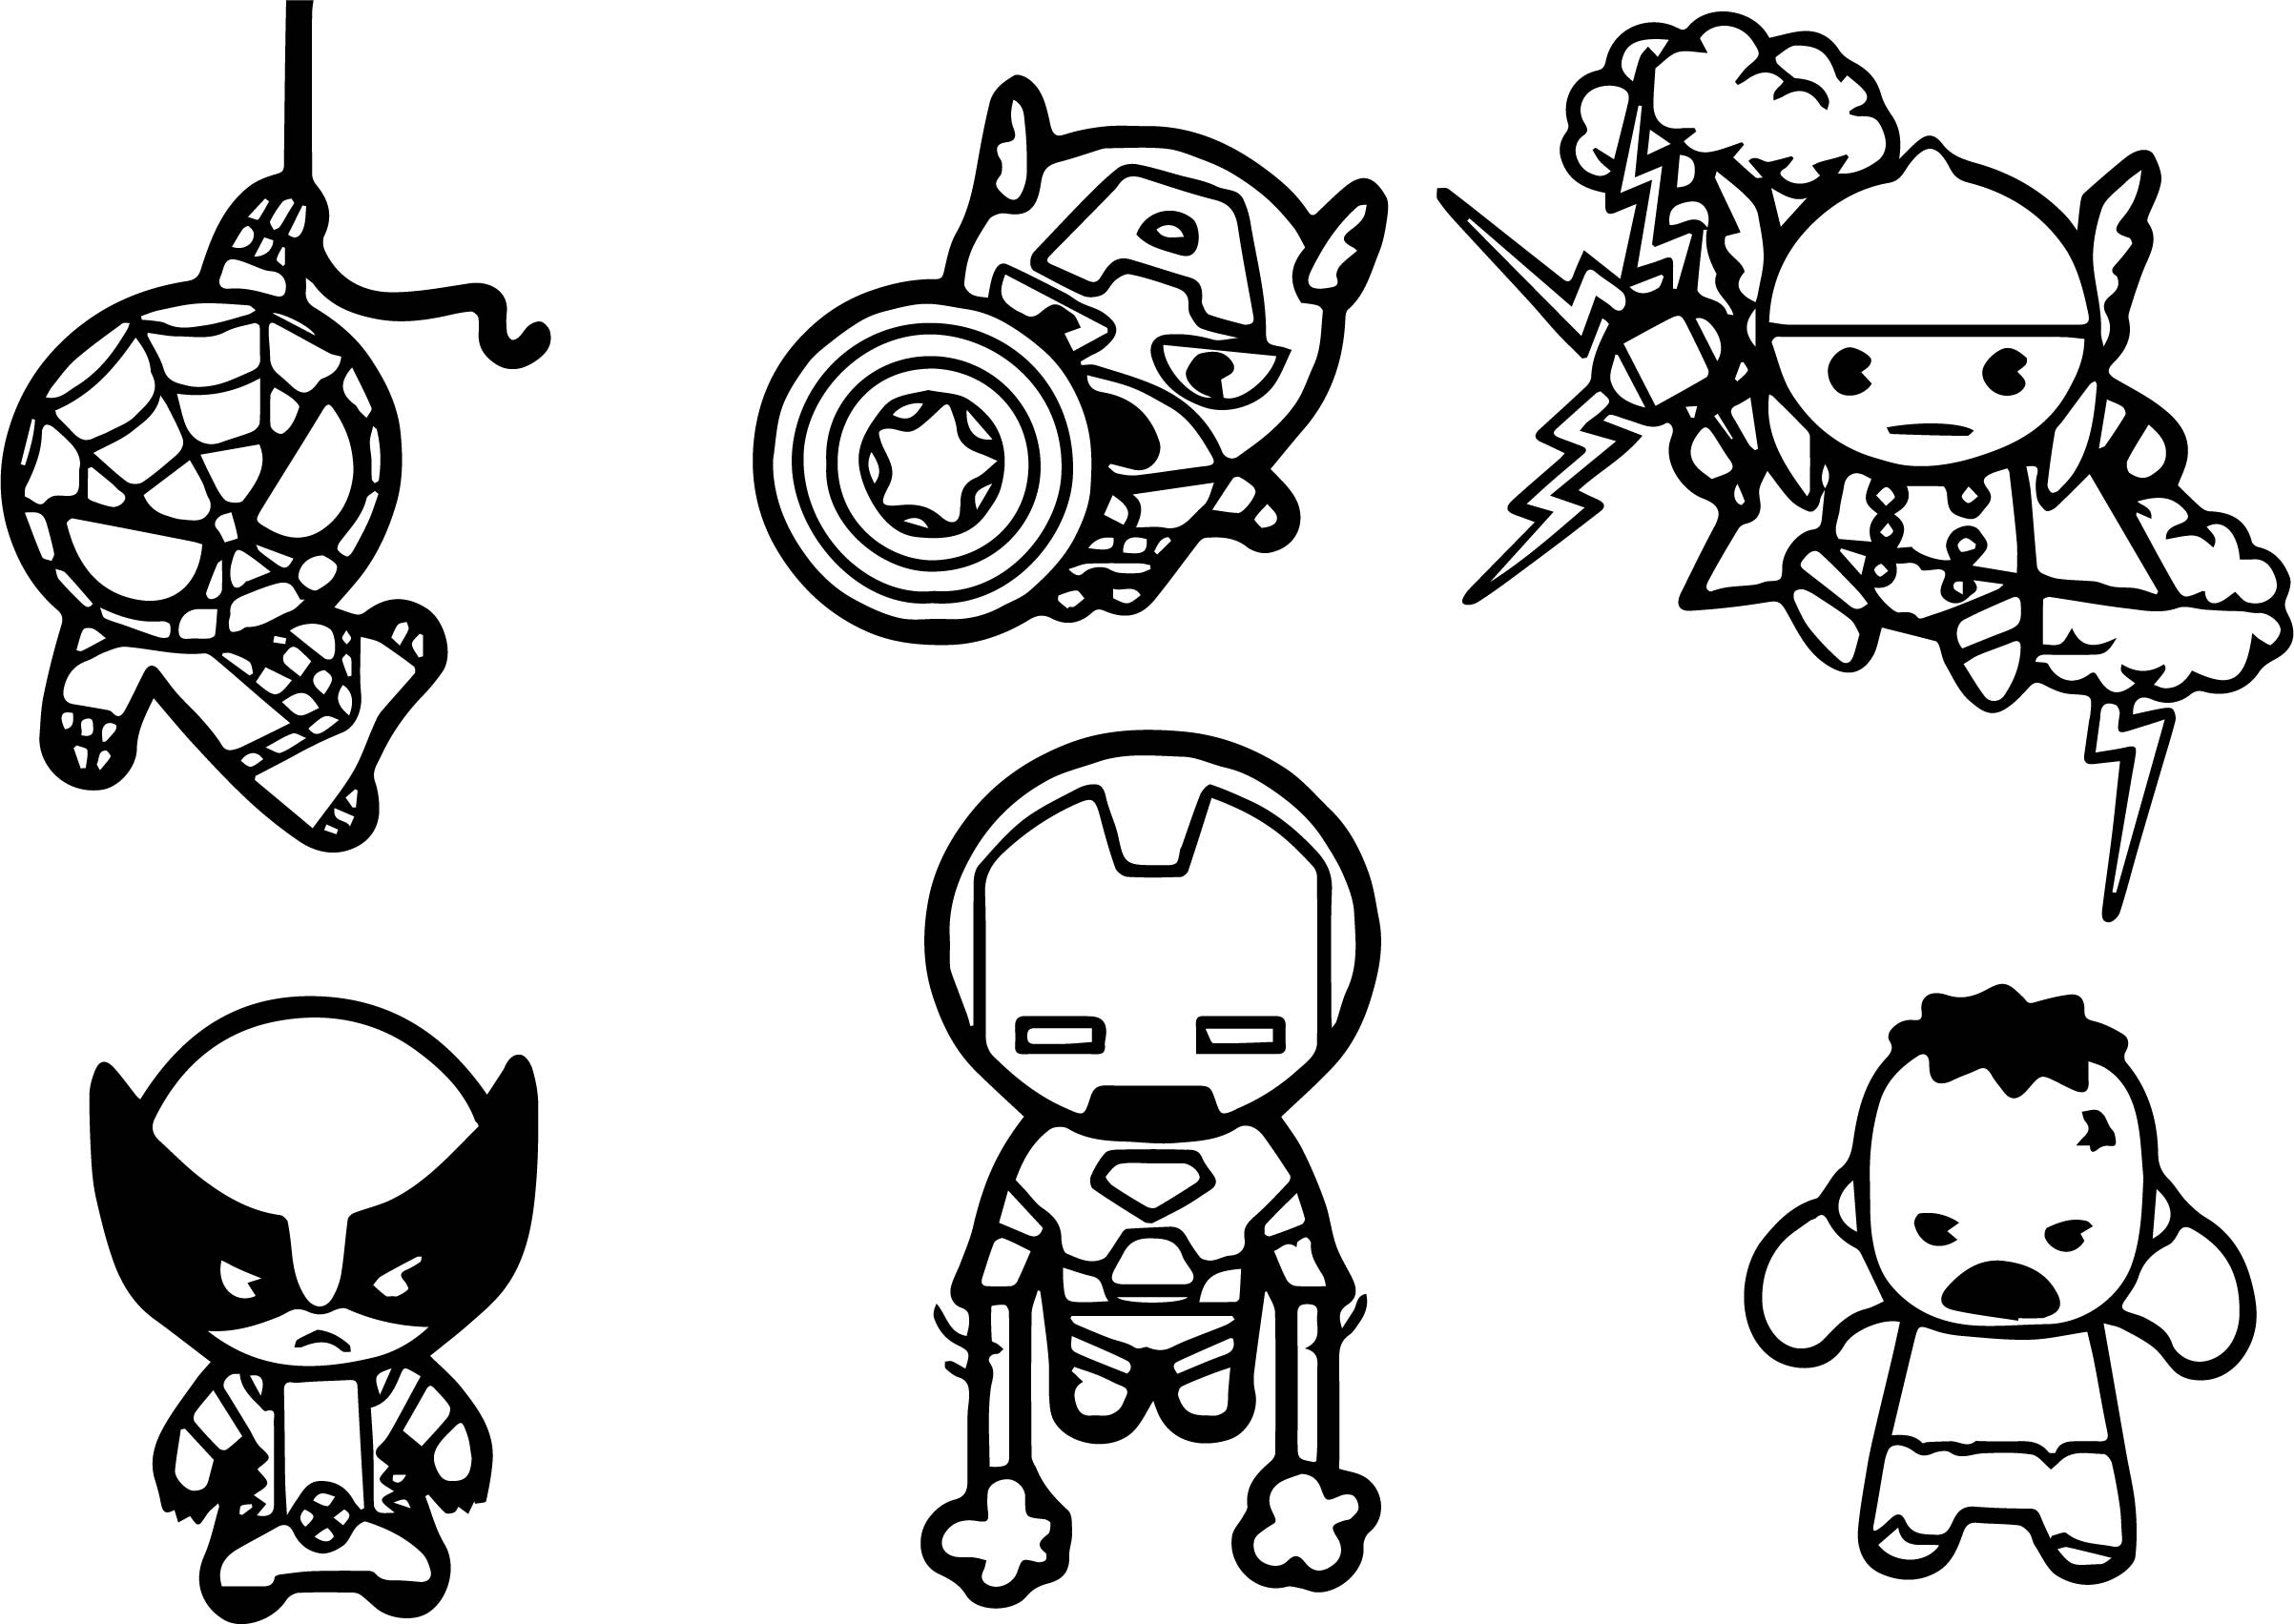 Download Avengers Coloring Pages - Best Coloring Pages For Kids